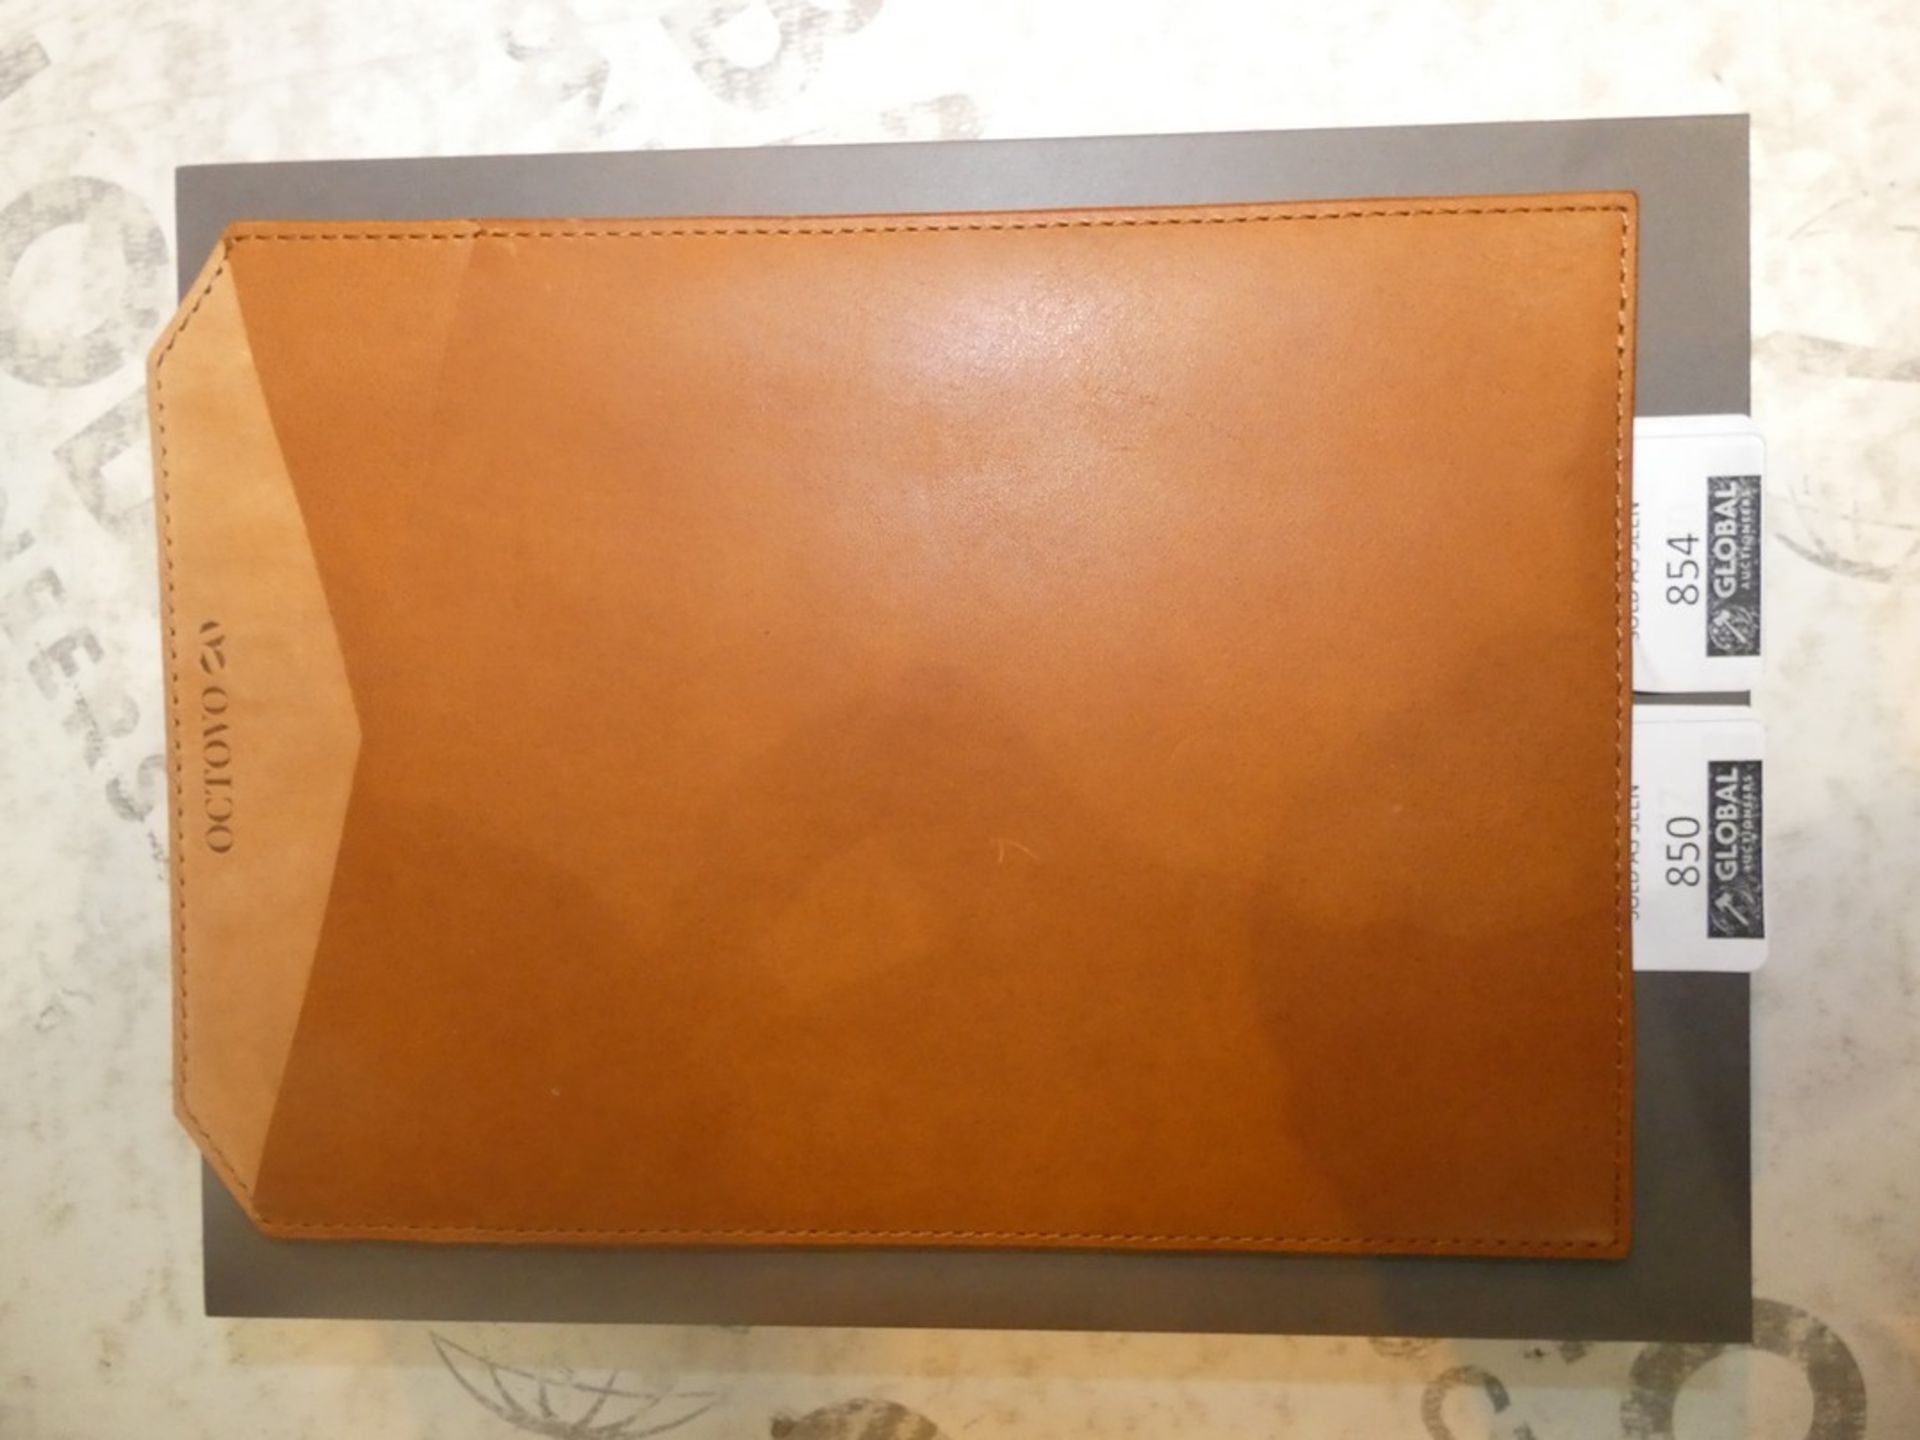 Boxed Brand New Octovo Brown Leather Slide in Wallet RRP £75